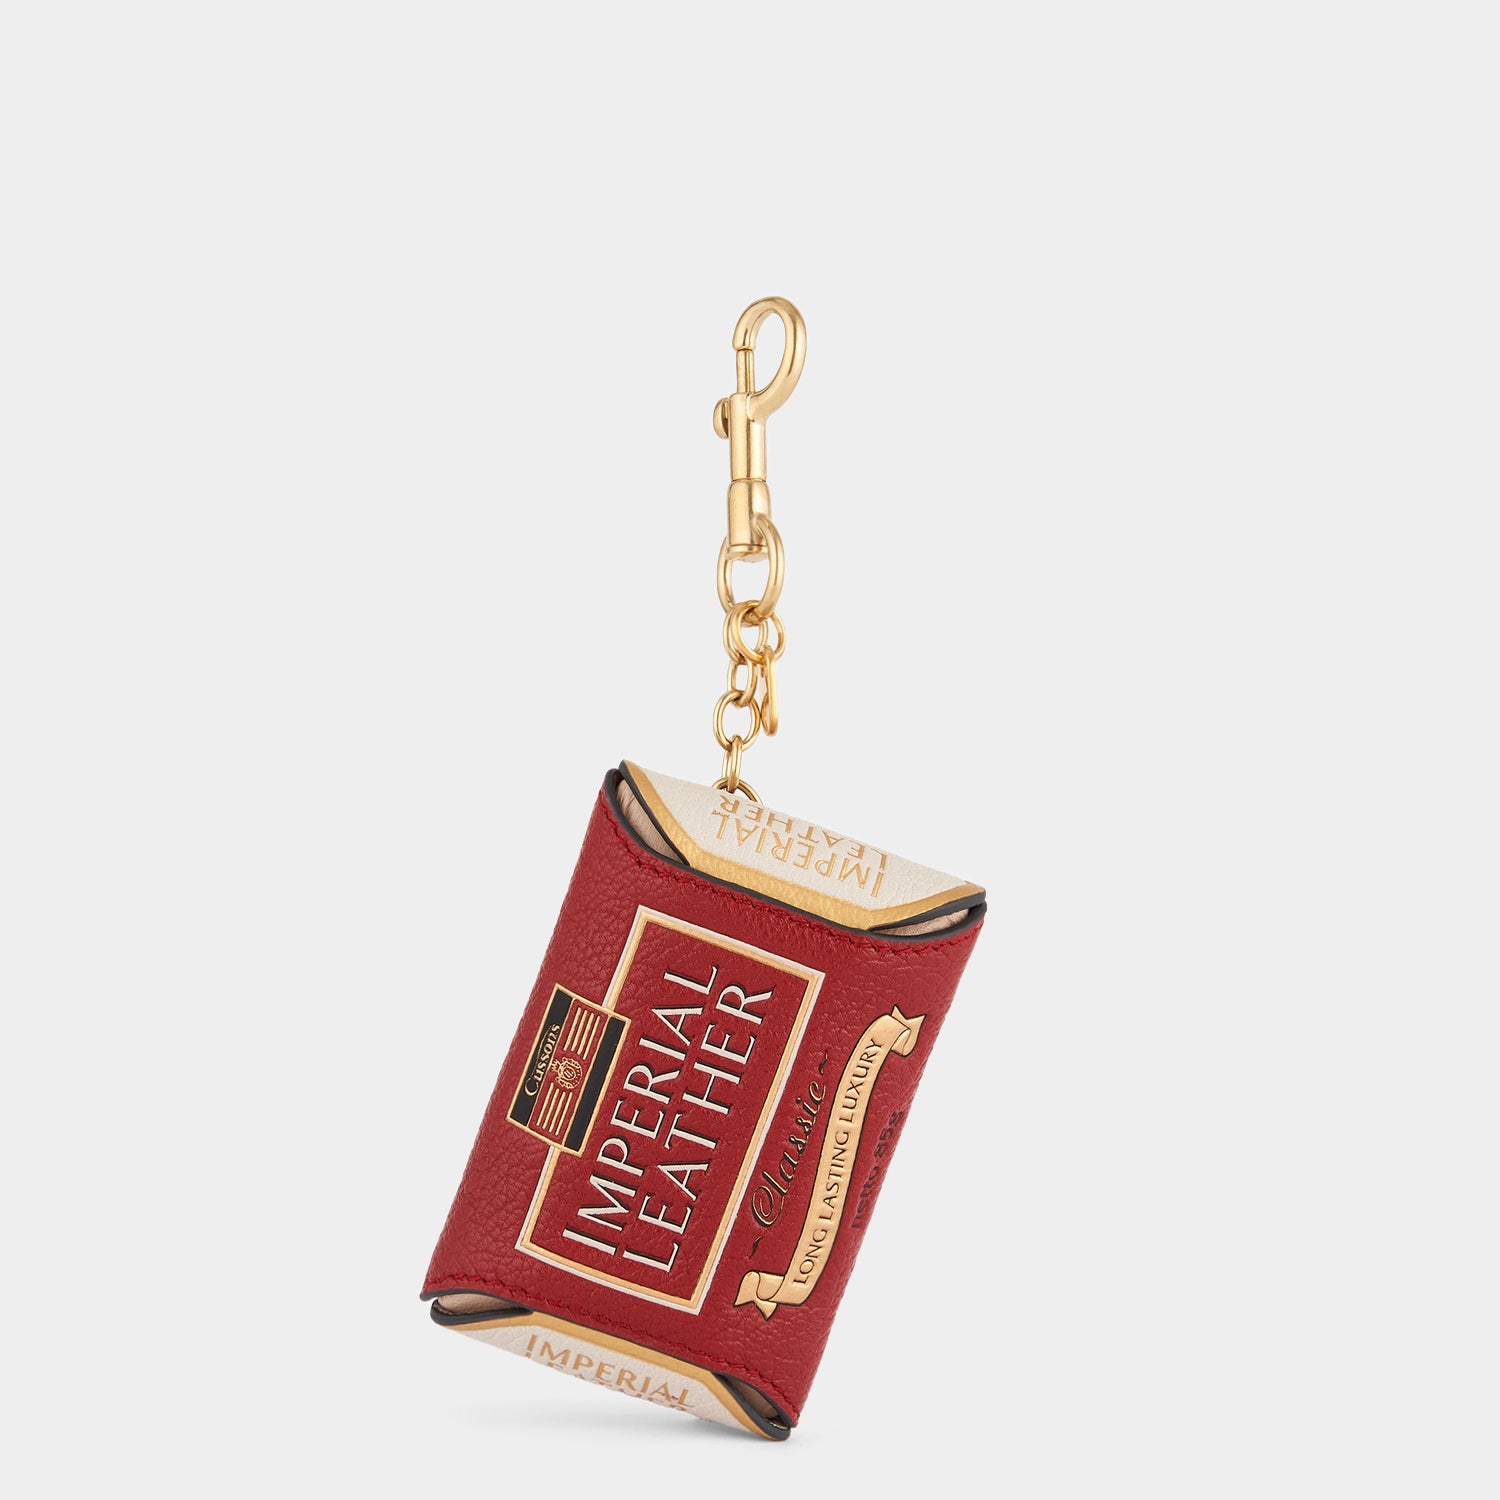 Anya Brands Imperial Leather Charm -

                  
                    Capra in Red -
                  

                  Anya Hindmarch UK
